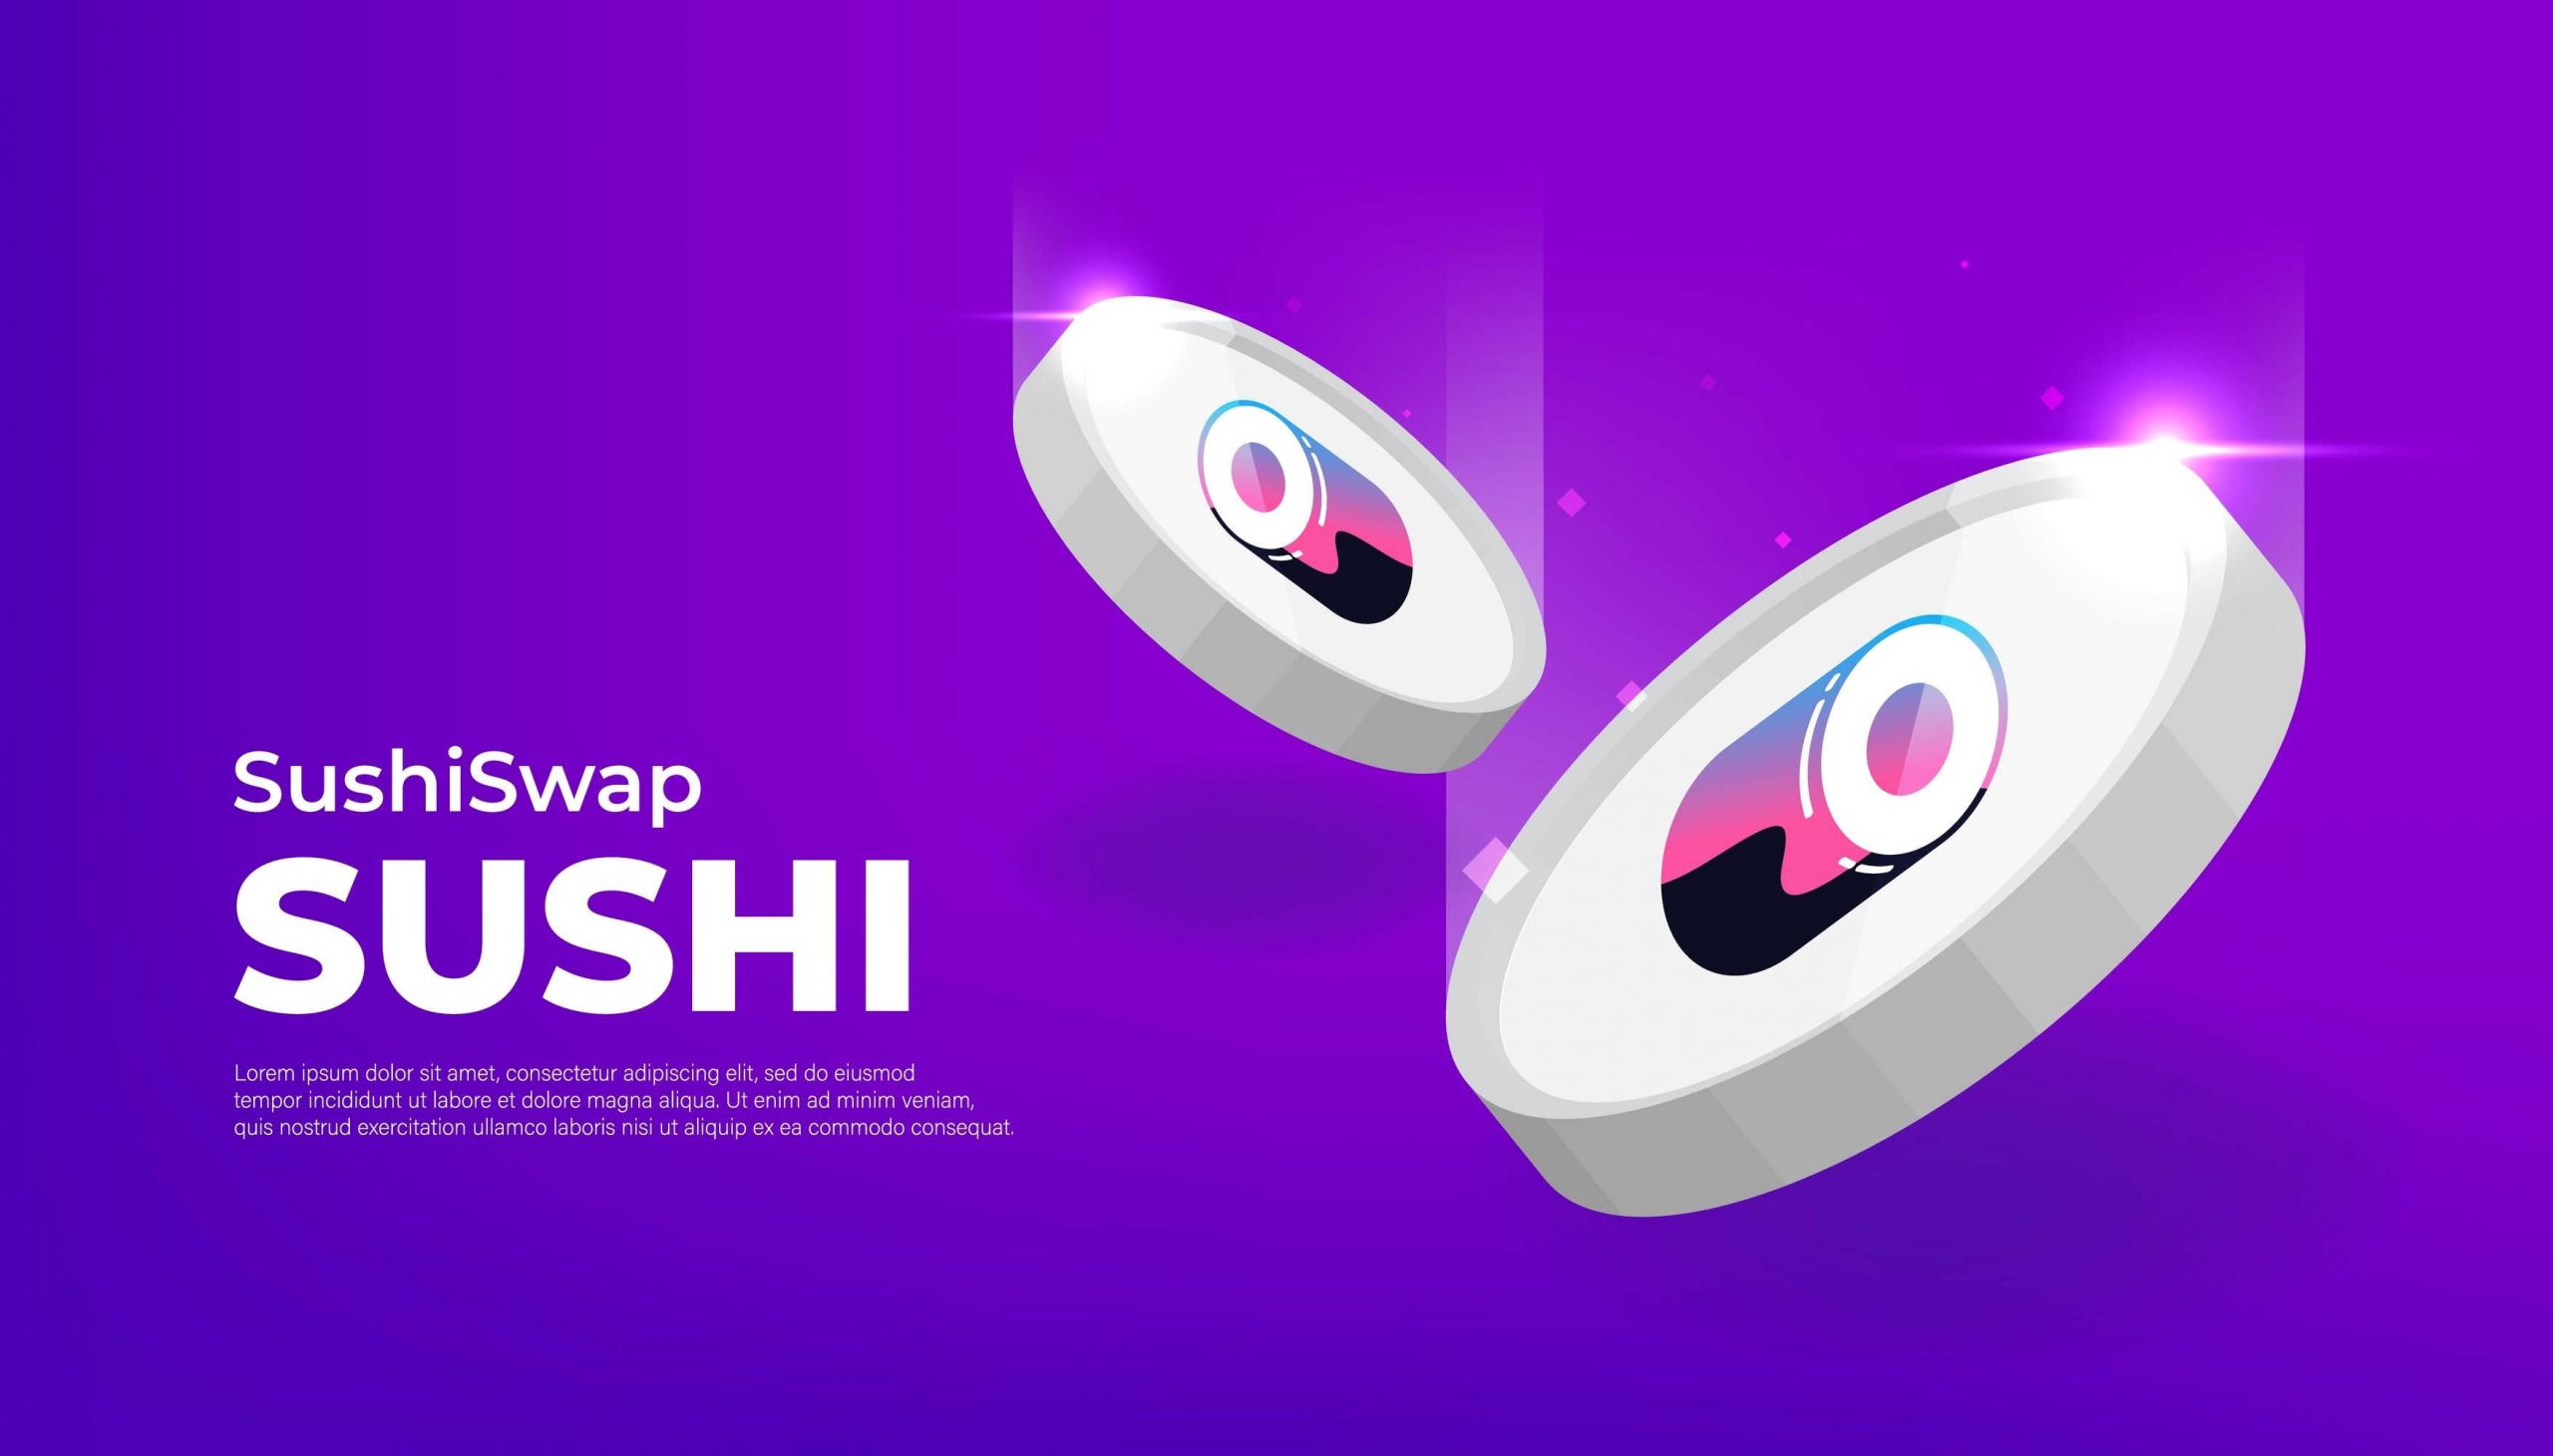 Sushiswap developers propose to divert 100% of fees generated to Sushi’s multisig